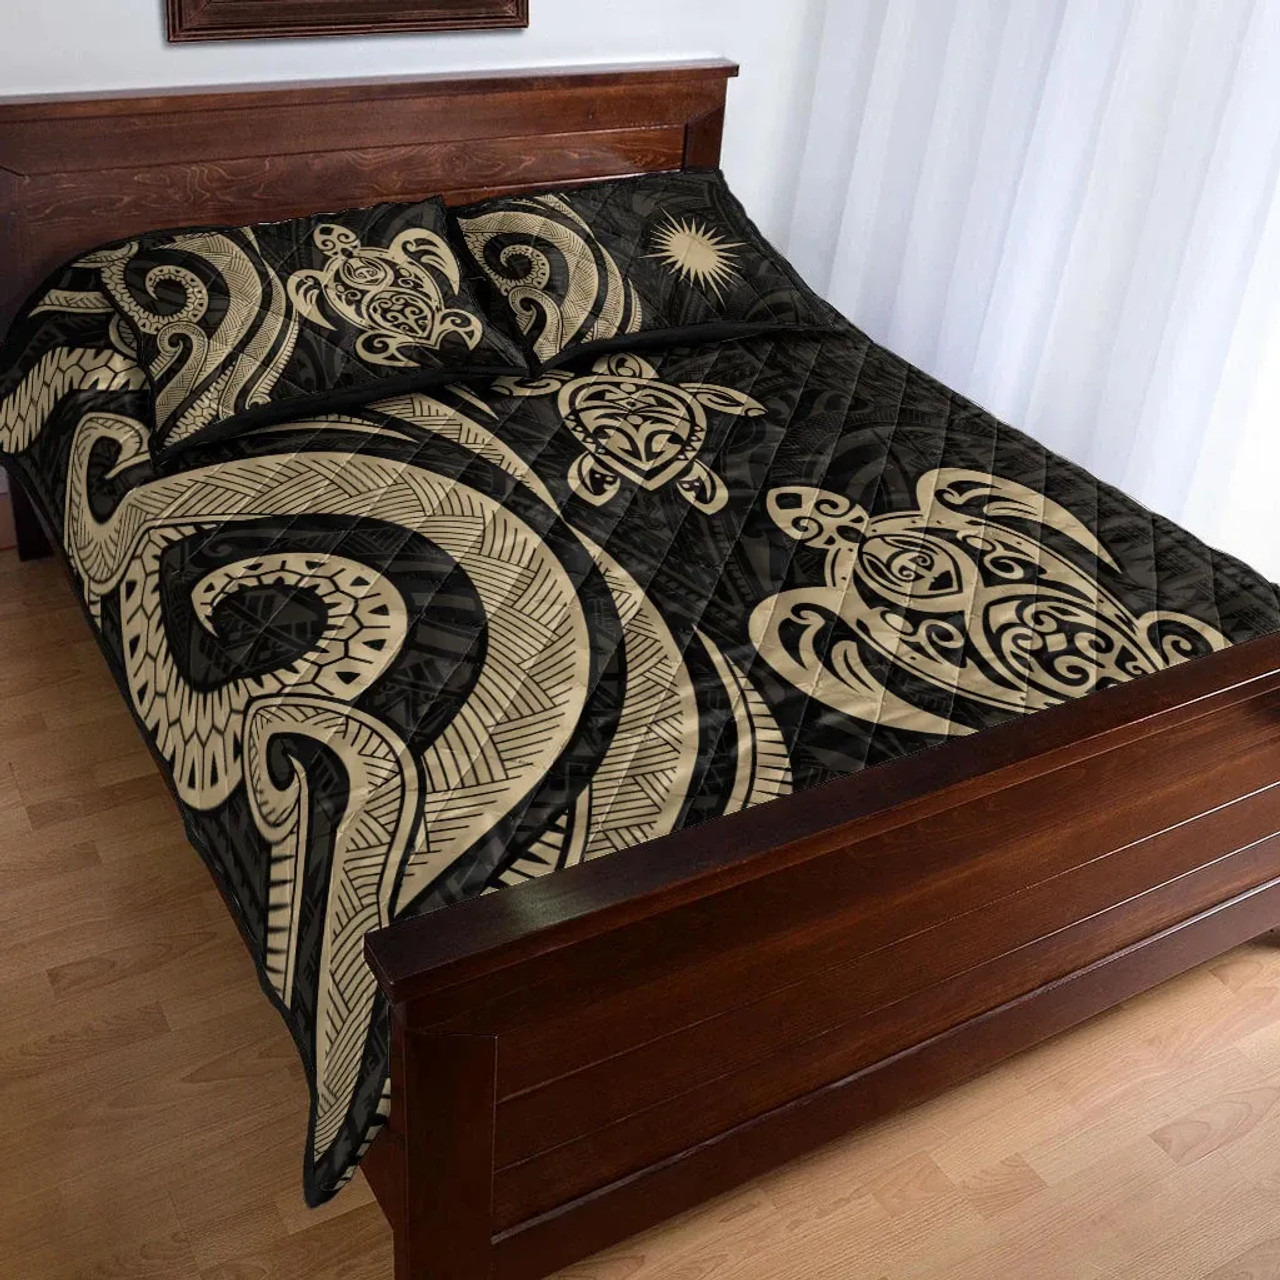 Marshall Islands Quilt Bed Set - Gold Tentacle Turtle 4